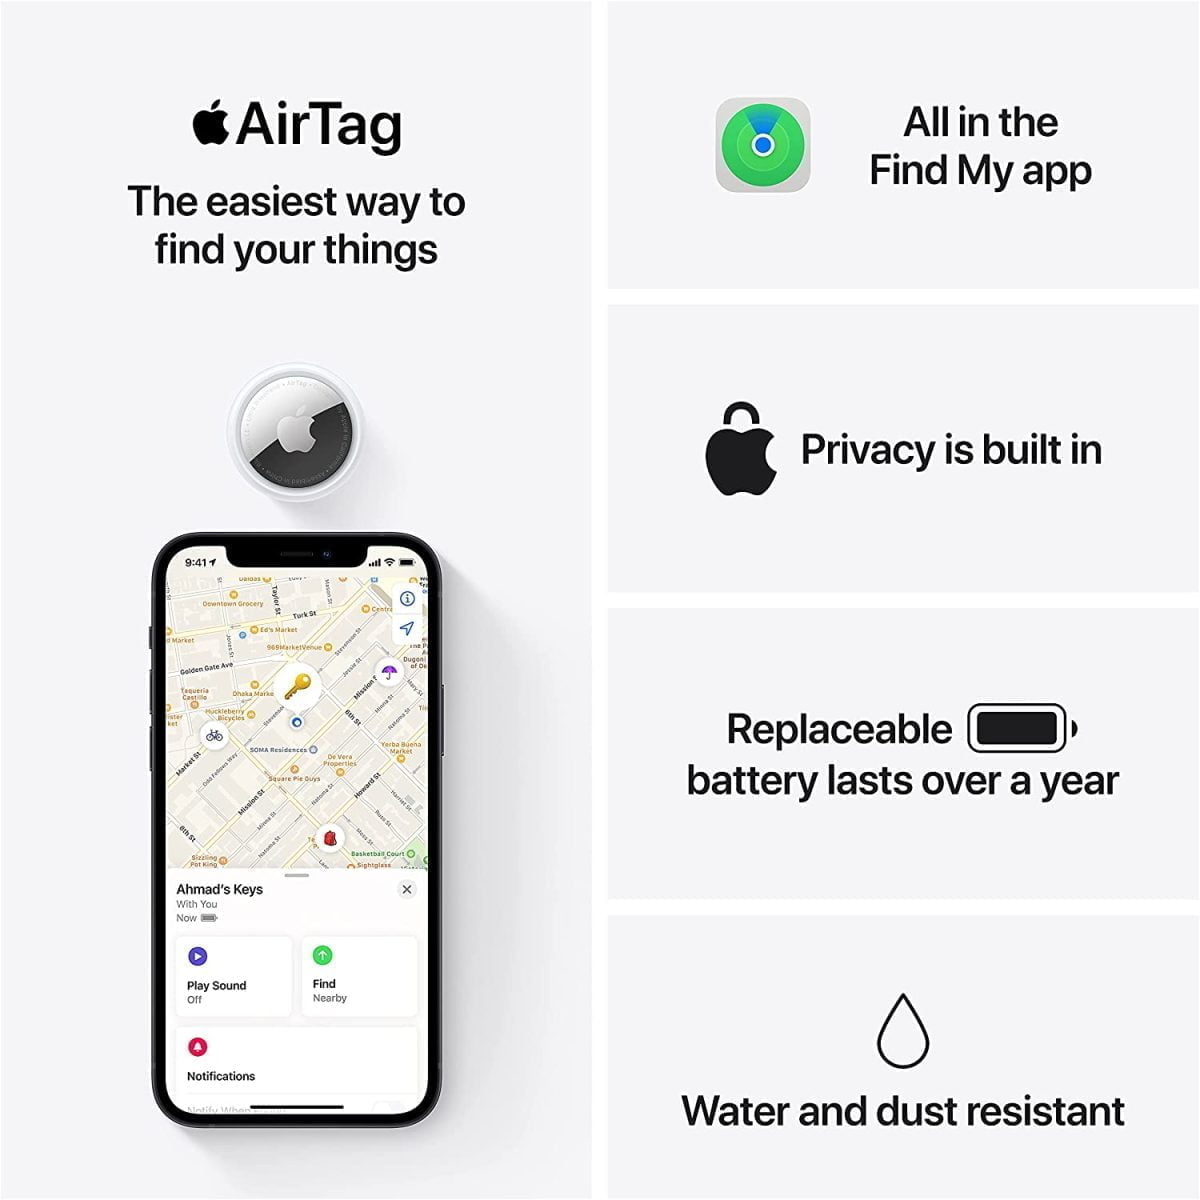 Apple &Lt;H1&Gt;Apple Airtag (4-Pack)&Lt;/H1&Gt; Airtag Is A Supereasy Way To Keep Track Of Your Stuff. Attach One To Your Keys, Slip Another In Your Backpack. And Just Like That, They’re On Your Radar In The Find My App, Where You Can Also Track Down Your Apple Devices And Keep Up With Friends And Family. Https://Youtu.be/Ckqvg0Rj35I Apple Airtag Apple Airtag 4 Pack